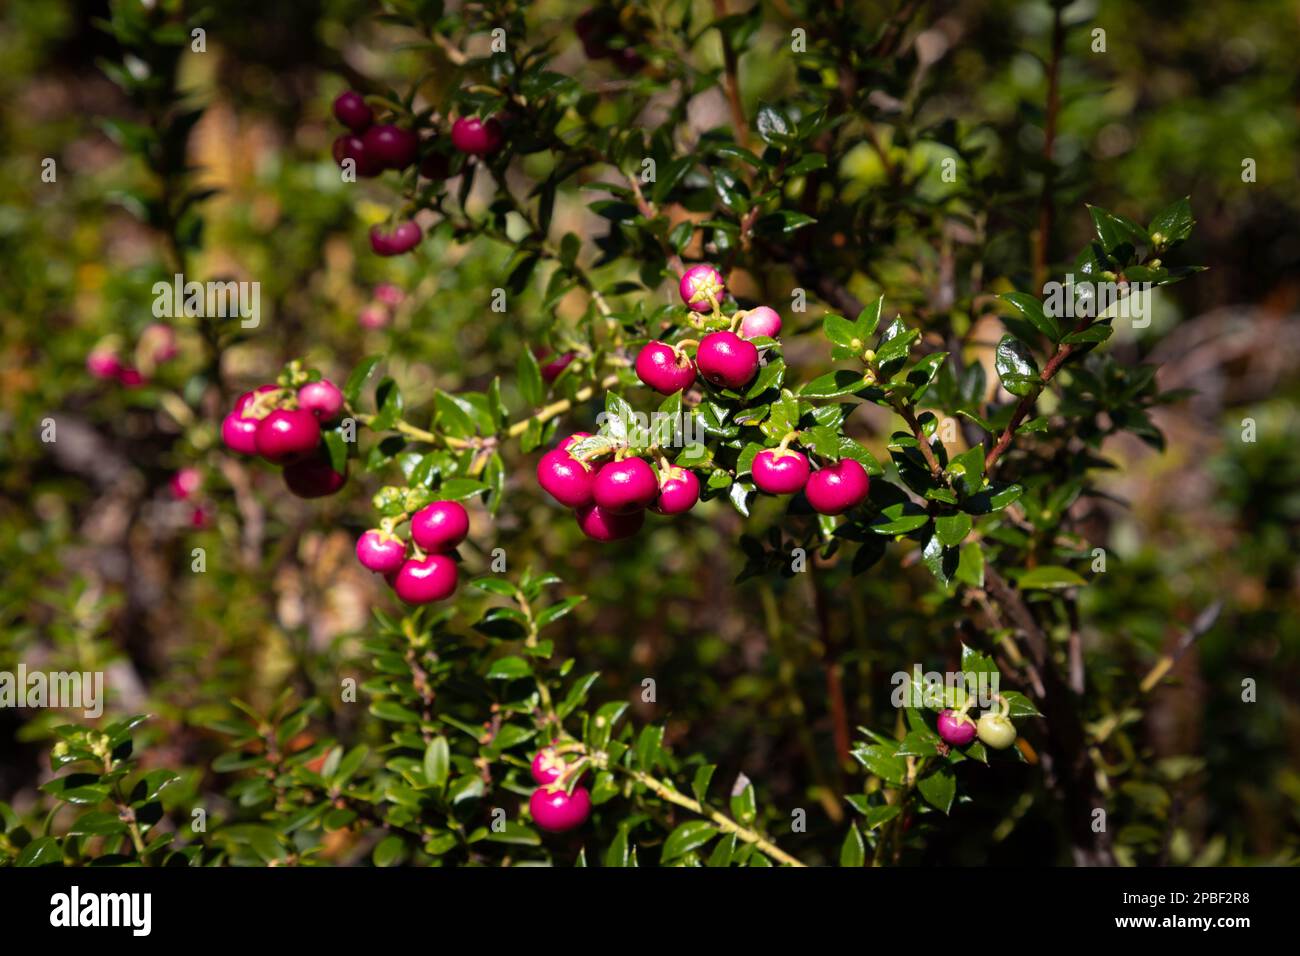 Wild berries emerge in the spring sunlight of Tierra del Fuego National Park in the Andes Mountains of Patagonia near Ushuaia Argentina on the border Stock Photo